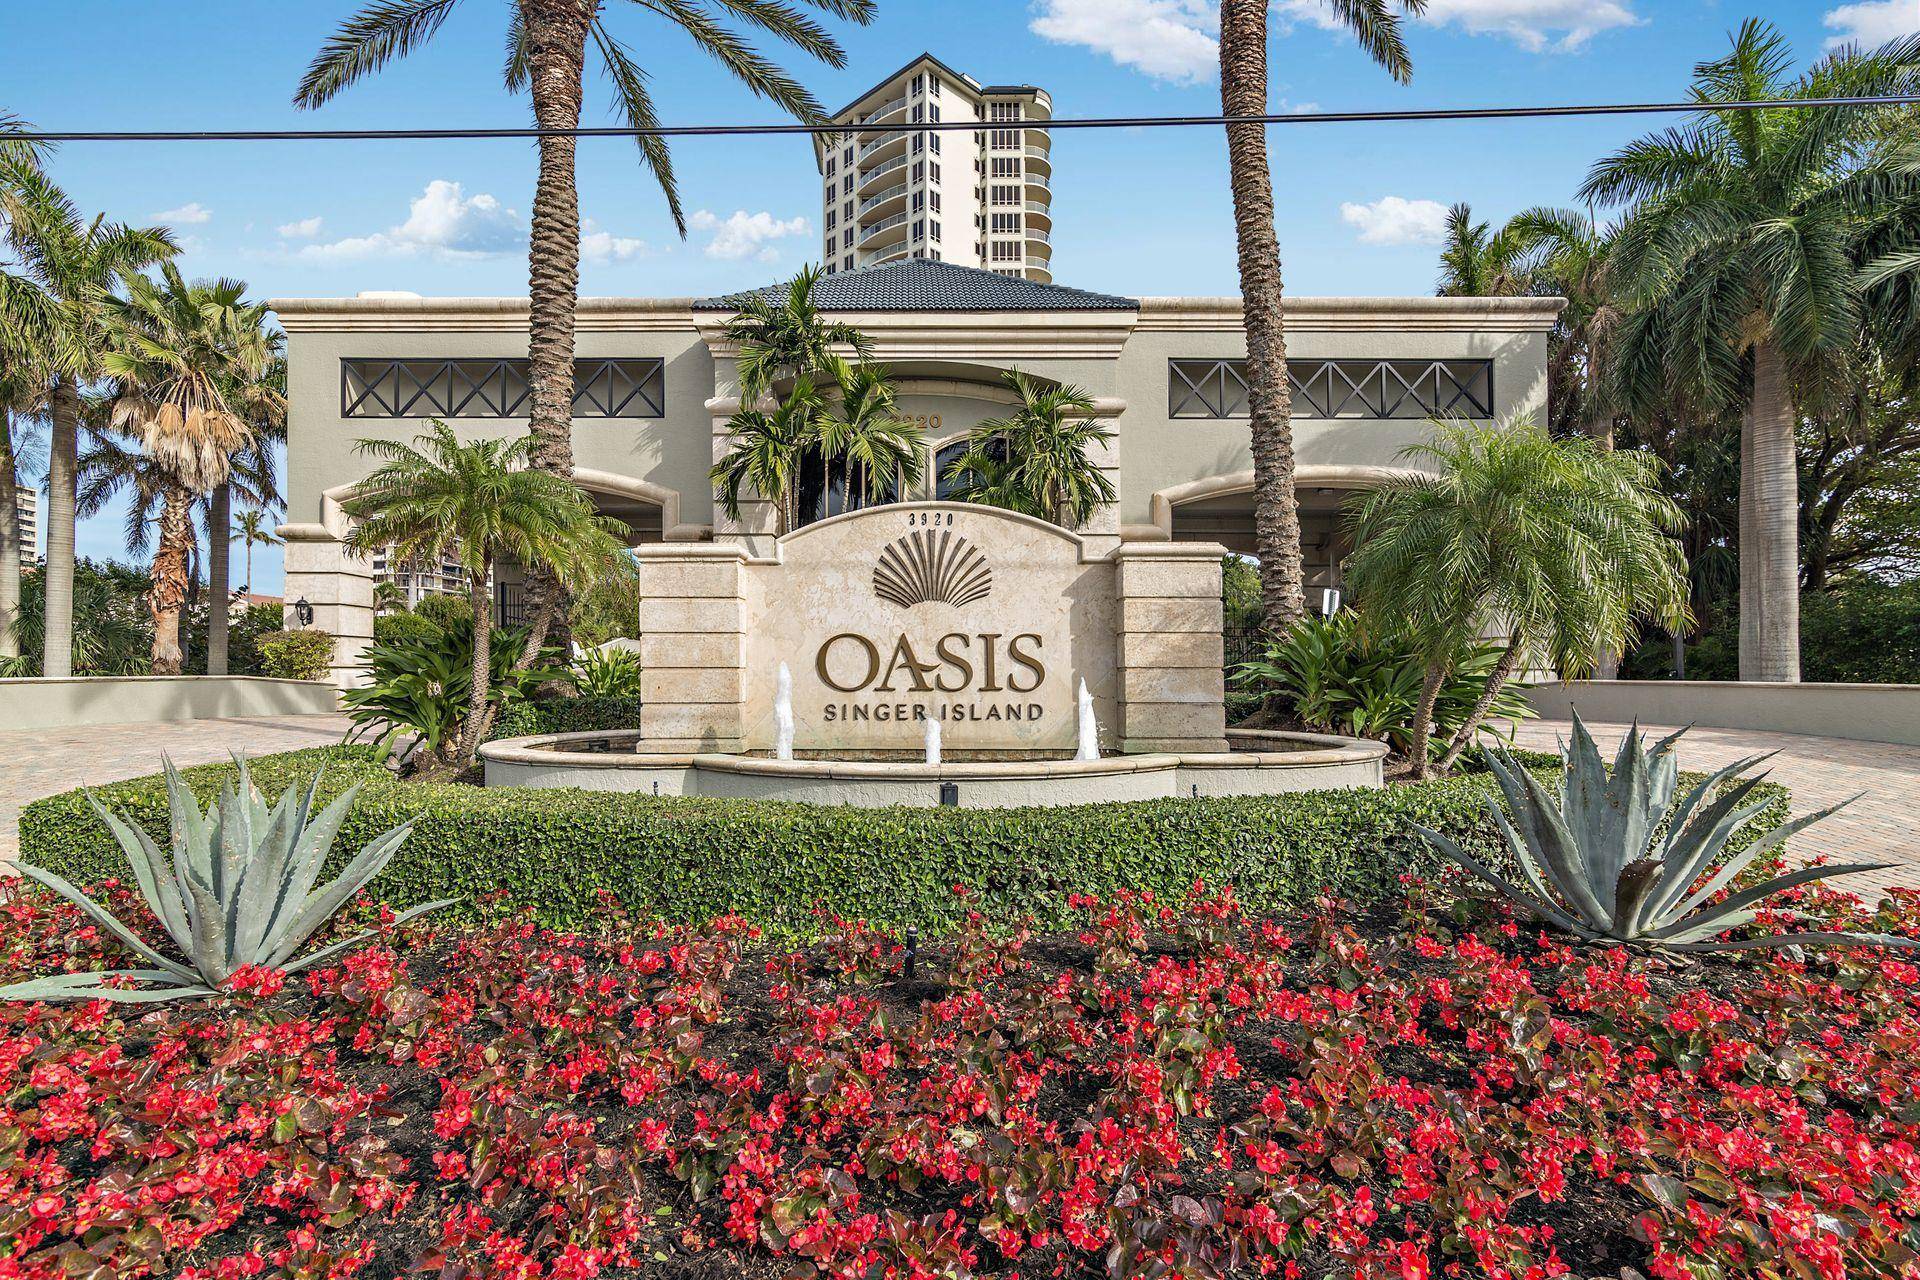 Enjoy the luxurious 4069 sq ft under a c residence 5A at The Oasis Singer Island with only one unit per floor.